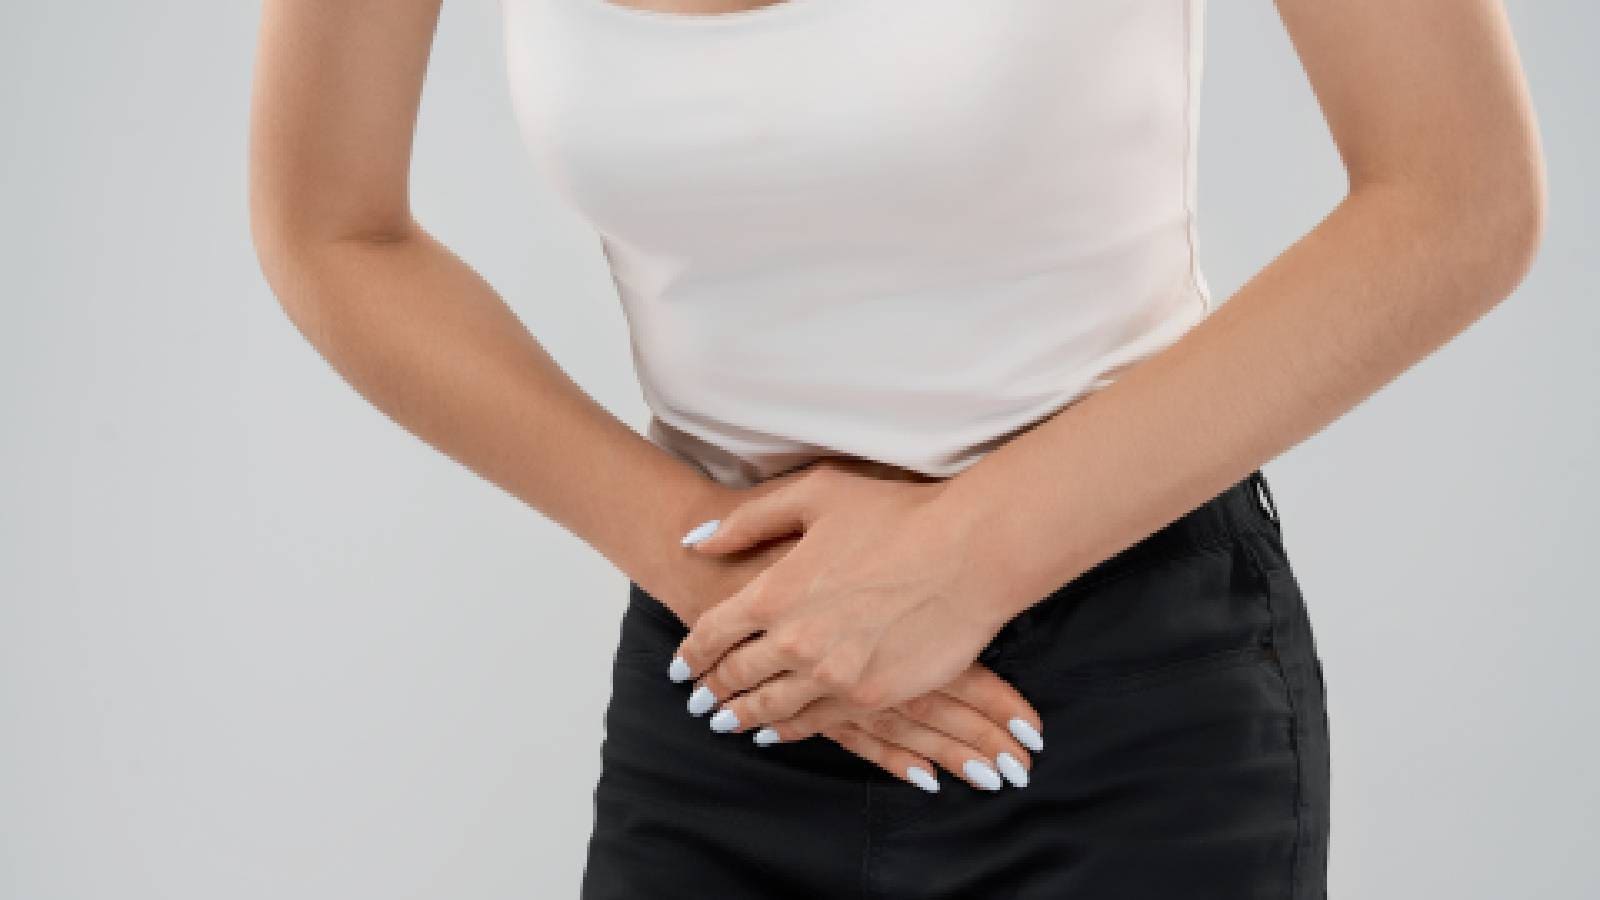 How to prevent UTI: 5 tips to keep urinary tract infection at bay